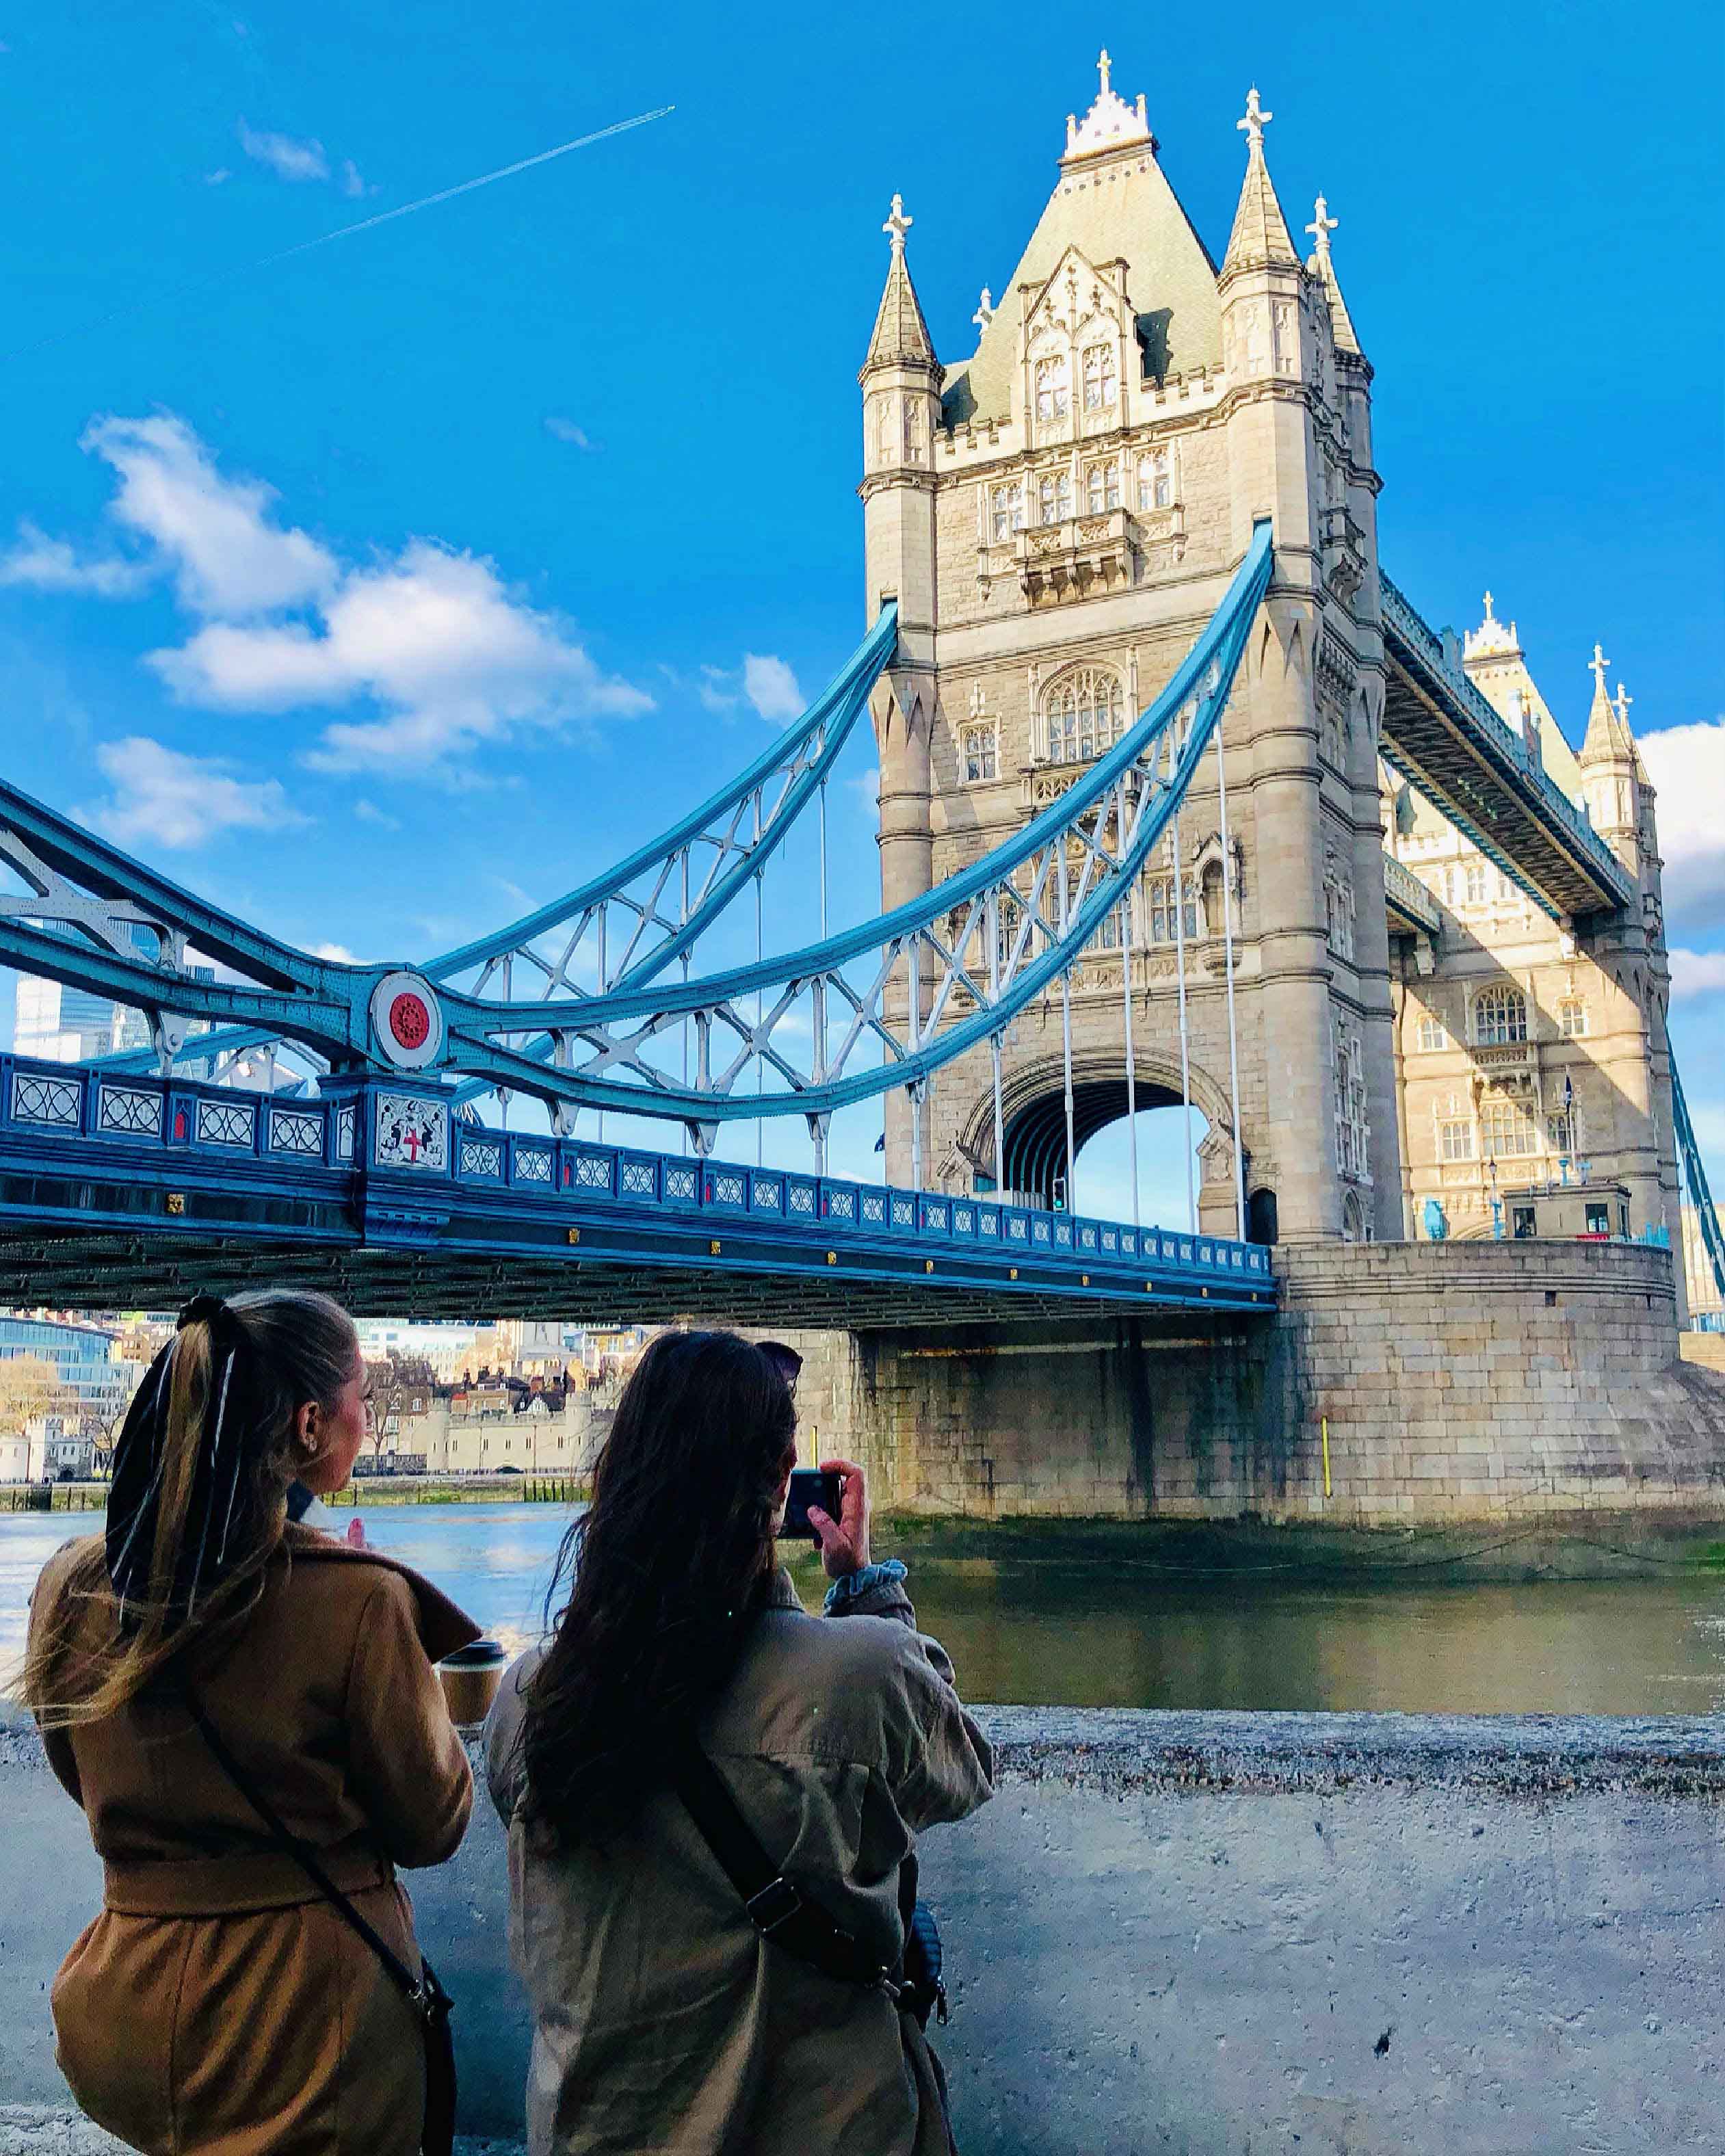 Two students taking in the views of the Tower Bridge in London, England.